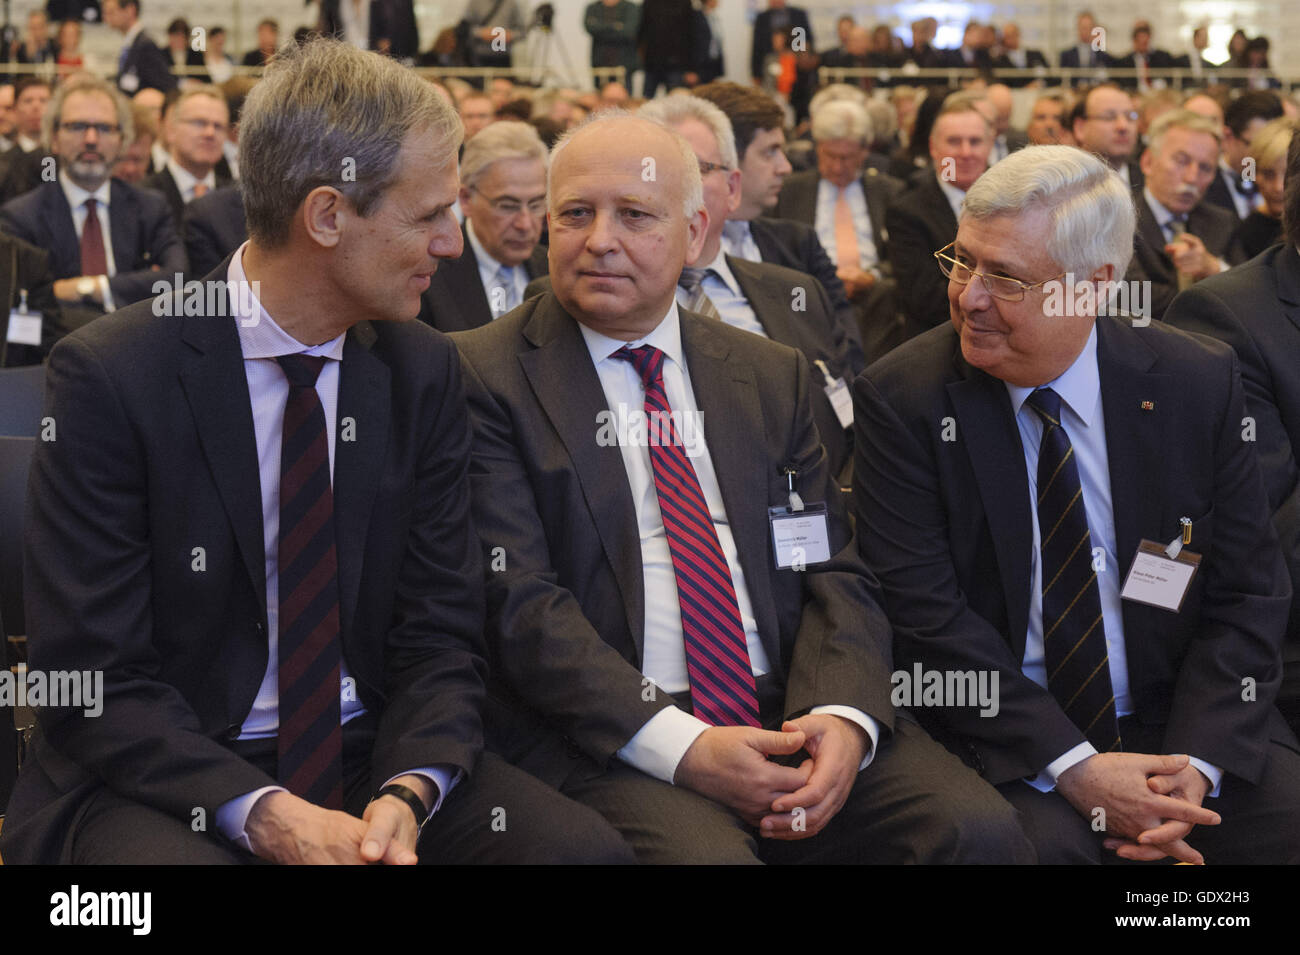 Michael Kemmer, Emmerich Müller and Klaus-Peter Müller in Berlin, Germany, 2014 Stock Photo